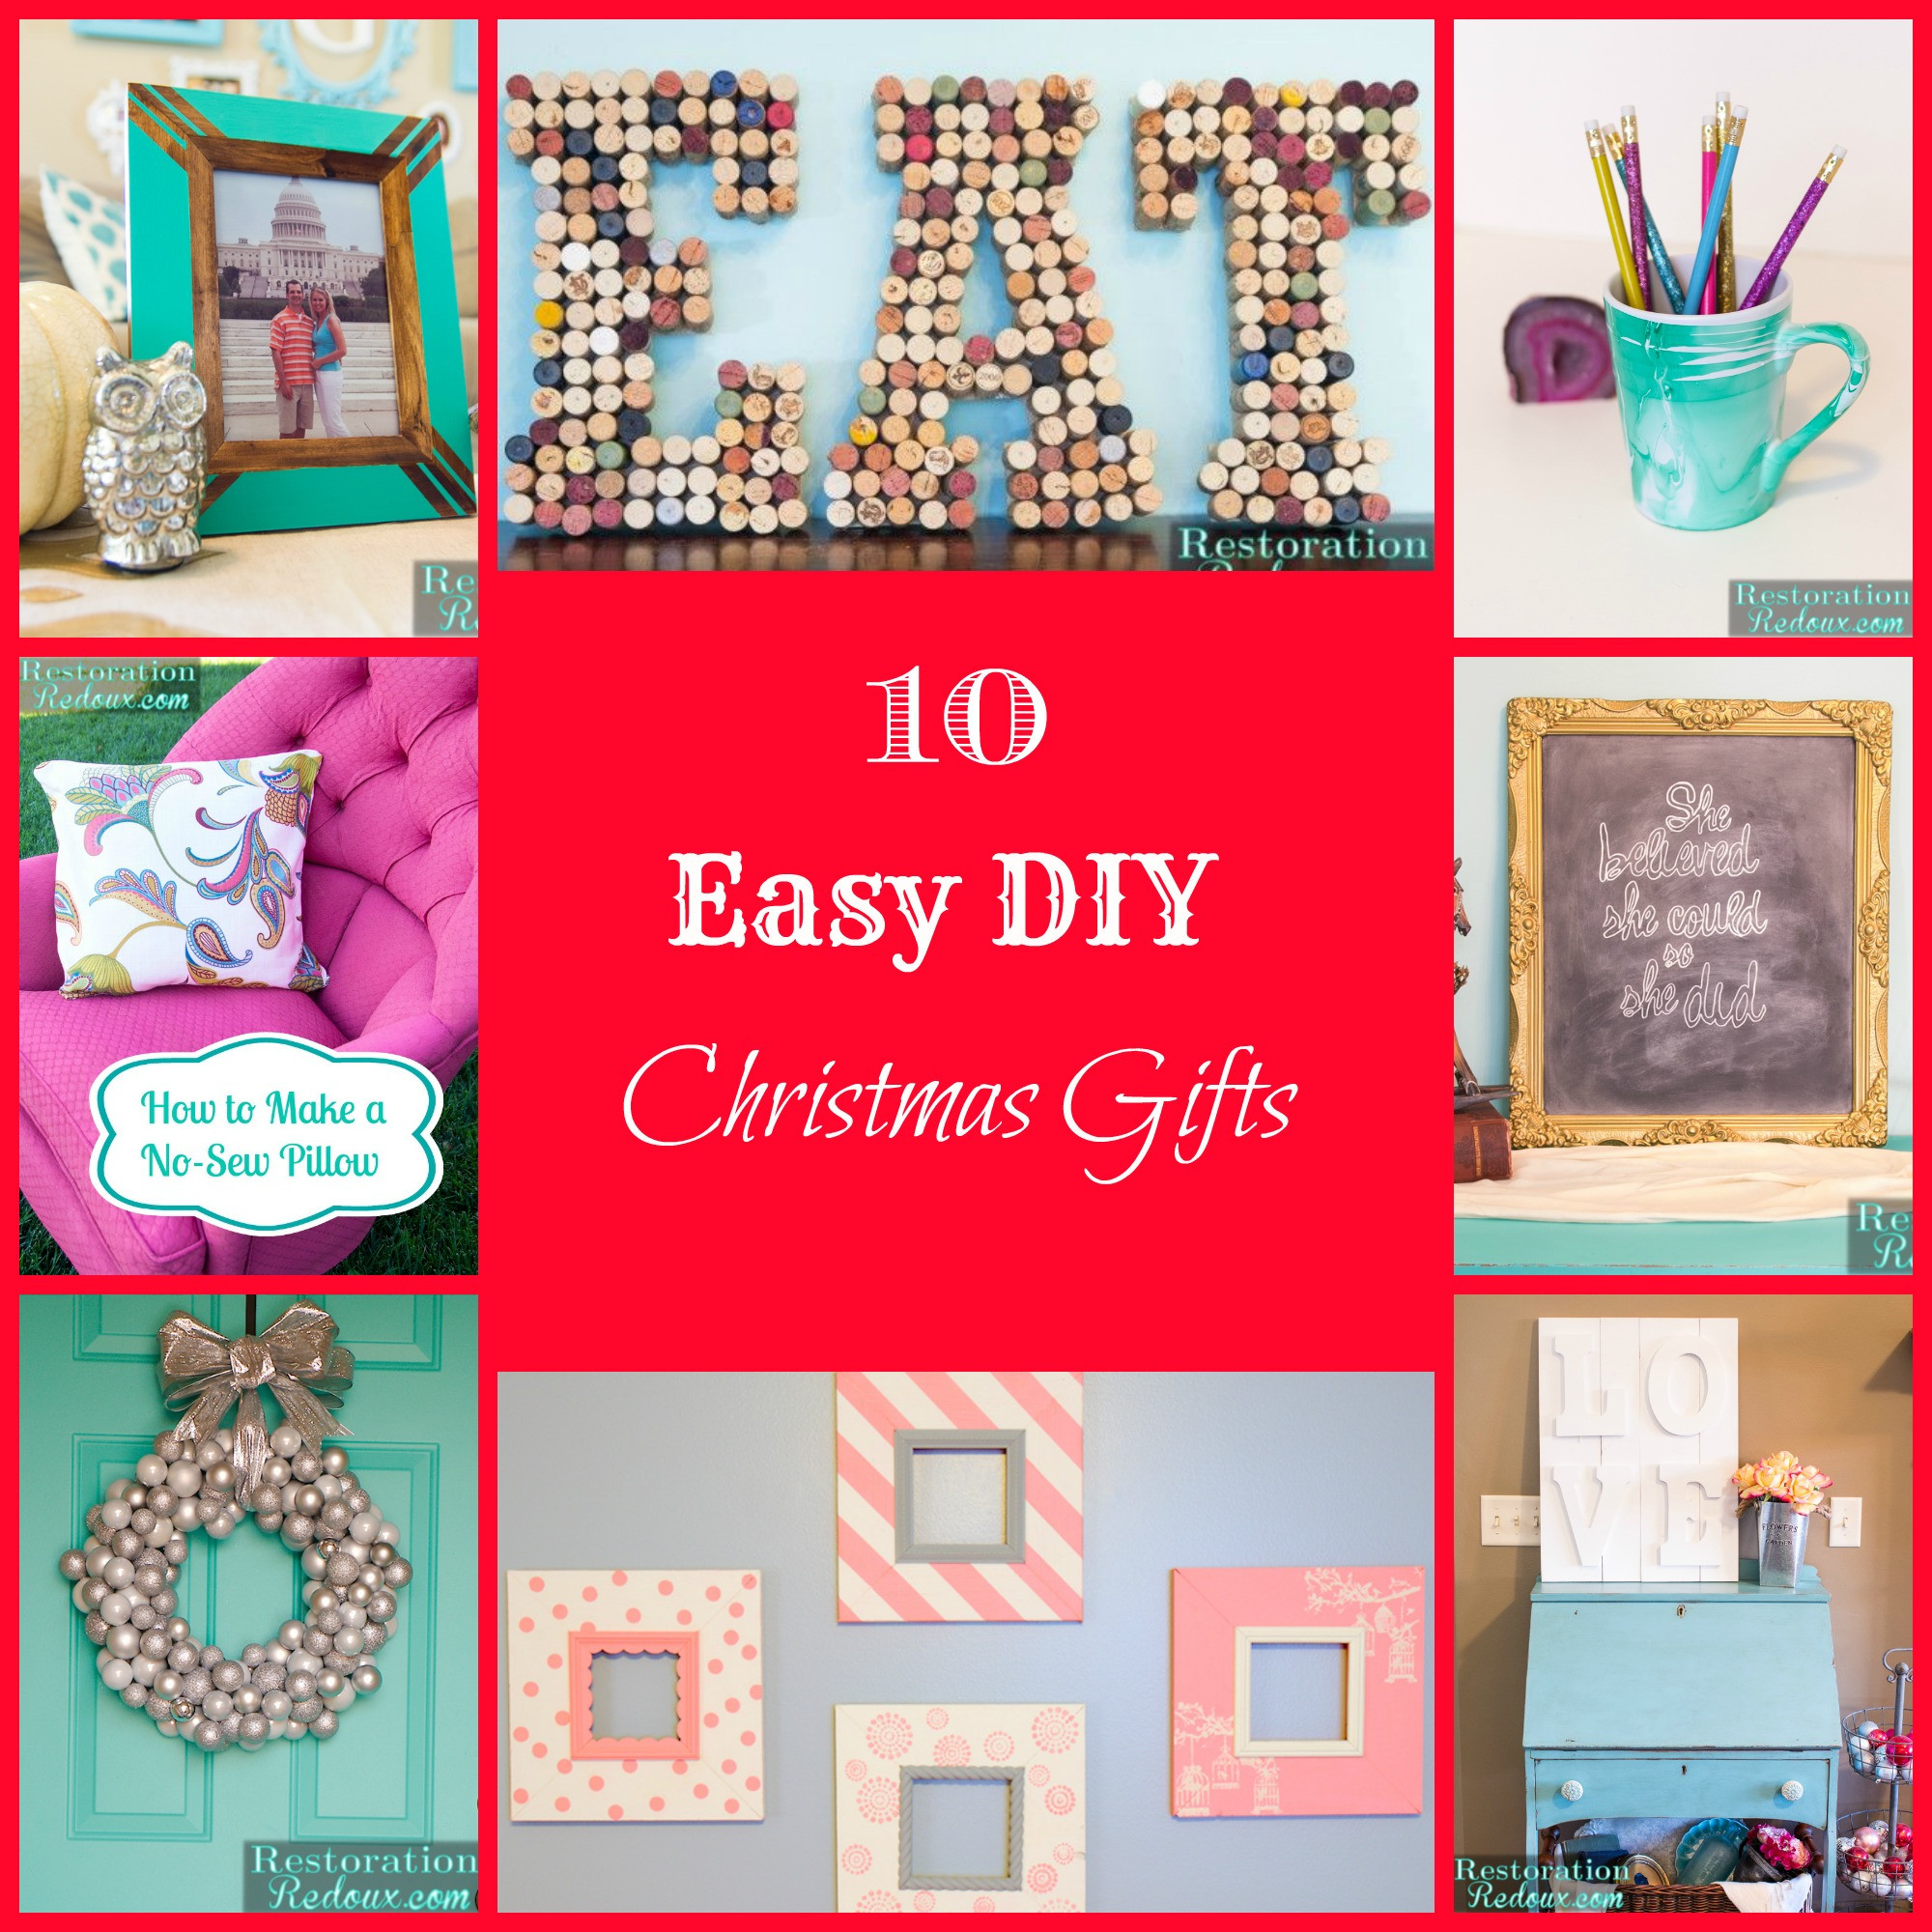 12 Days Of Christmas Gift Ideas For Her
 10 Easy DIY Christmas Gifts Daily Dose of Style